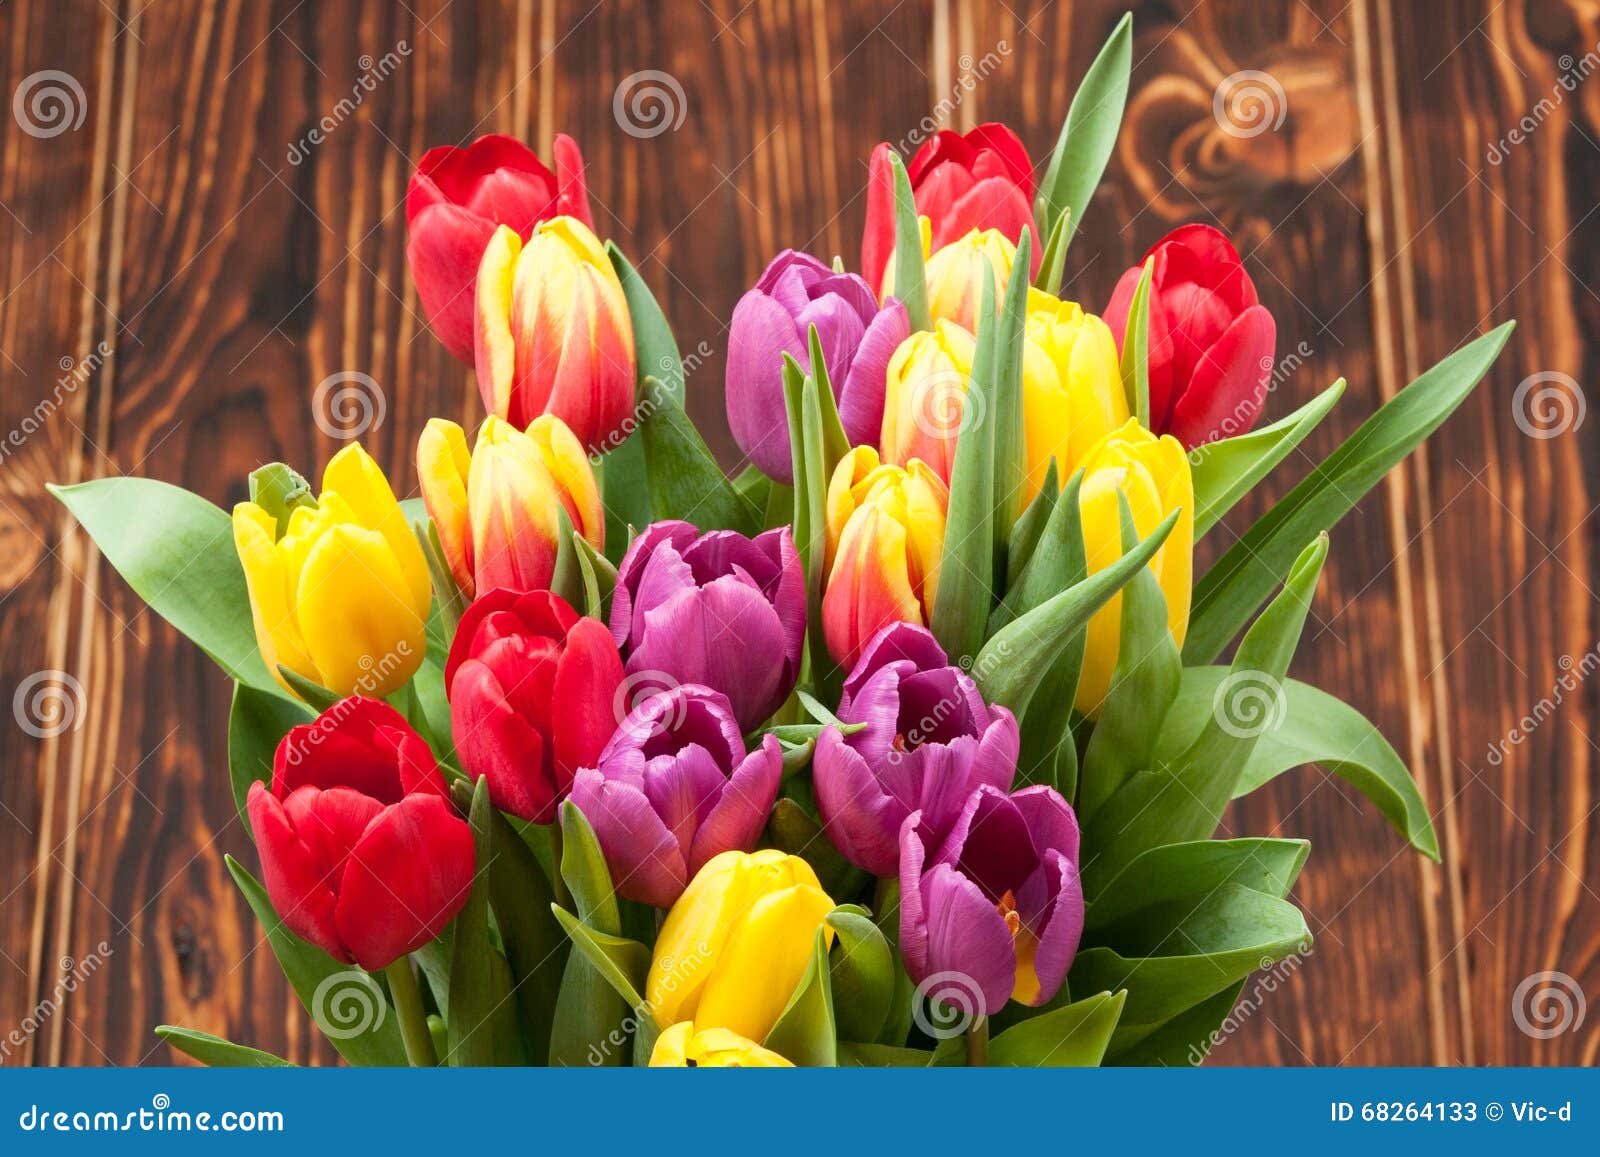 Assorted Tulips Bouquet. Burned Wooden Background. Copy Space Stock ...